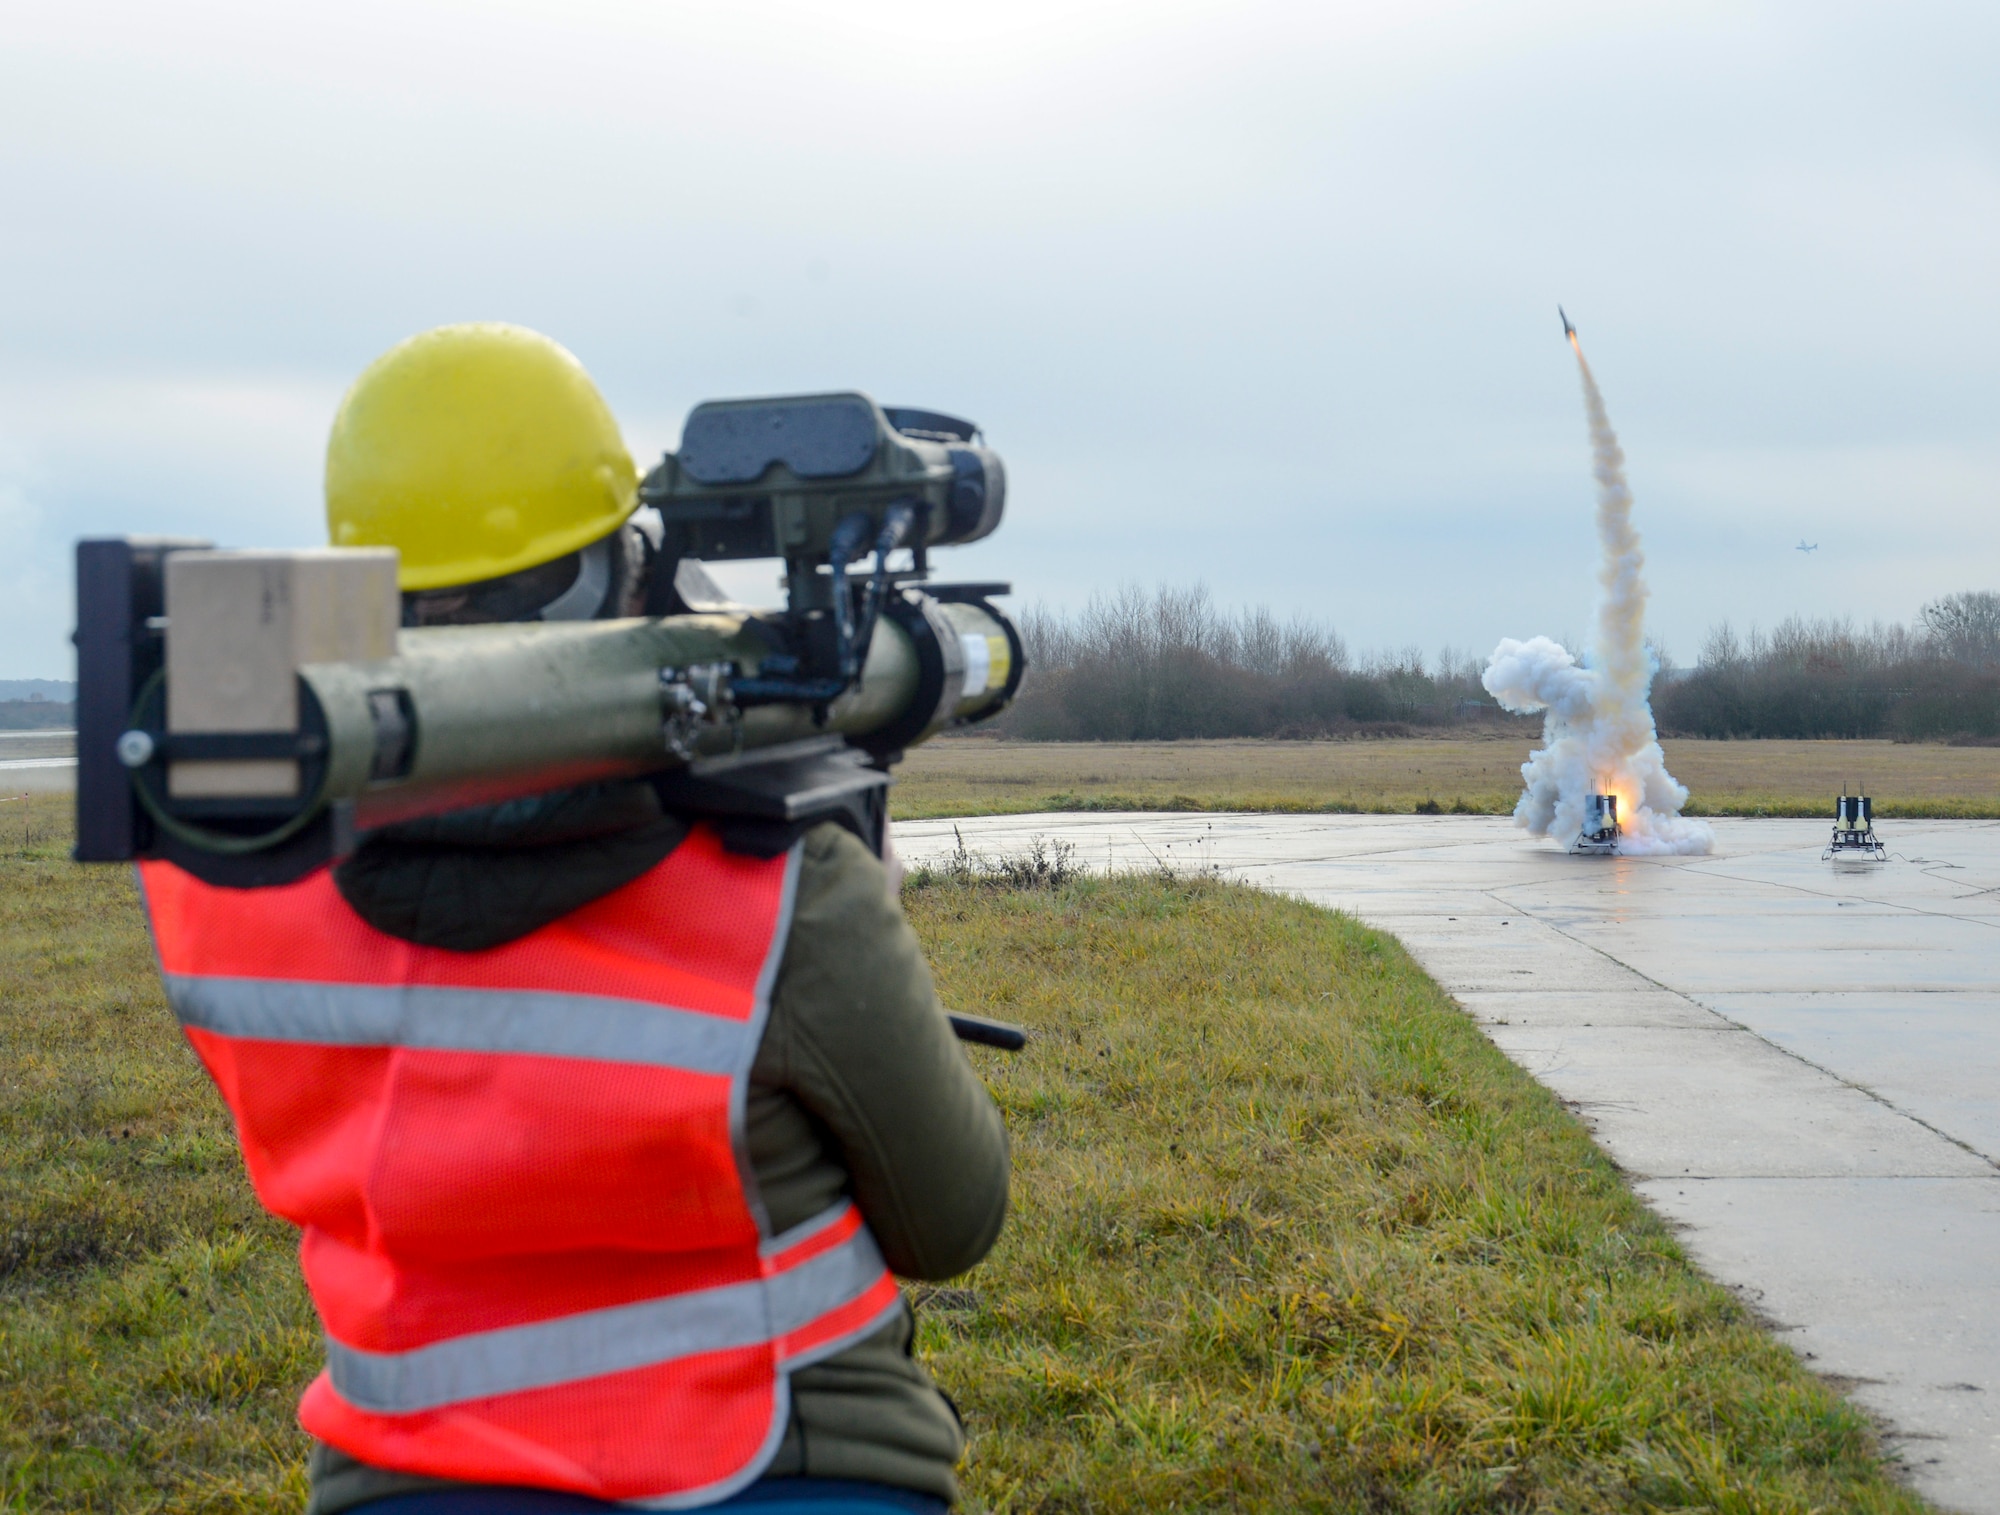 A Polygone employee uses a man-portable aircraft survivability trainer, or MAST, and a smoky surface-to-air missile to simulate enemy fire for the aircrew of a C-130J Super Hercules aircraft assigned to the 37th Airlift Squadron, 86th Airlift Wing, Ramstein Air Base, Germany, during exercise Contested Forge on Grostenquin Air Base, France, Dec. 4, 2018. Contested Forge is an annual exercise that tests the 435th Contingency Response Group’s ability to build a forward operating base and conduct airfield operations in an austere environment, friendly or hostile. (U.S. Air Force photo by Staff Sgt. Timothy Moore)